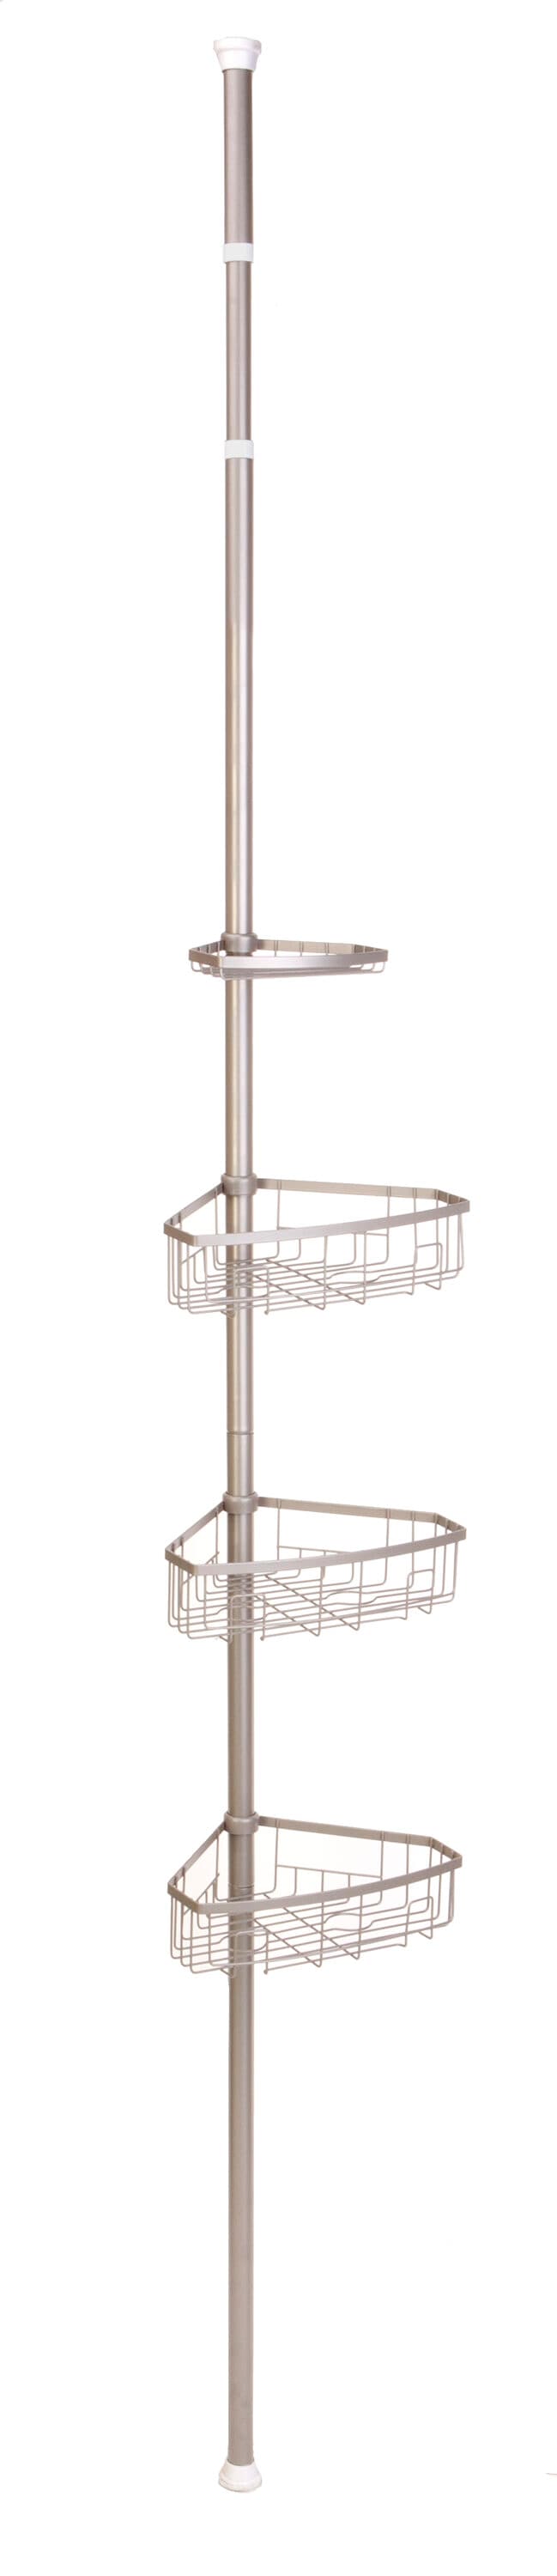 Bath Bliss Gold Plastic 4-Shelf Tension Pole Freestanding Shower Caddy  5.91-in x 101-in in the Bathtub & Shower Caddies department at